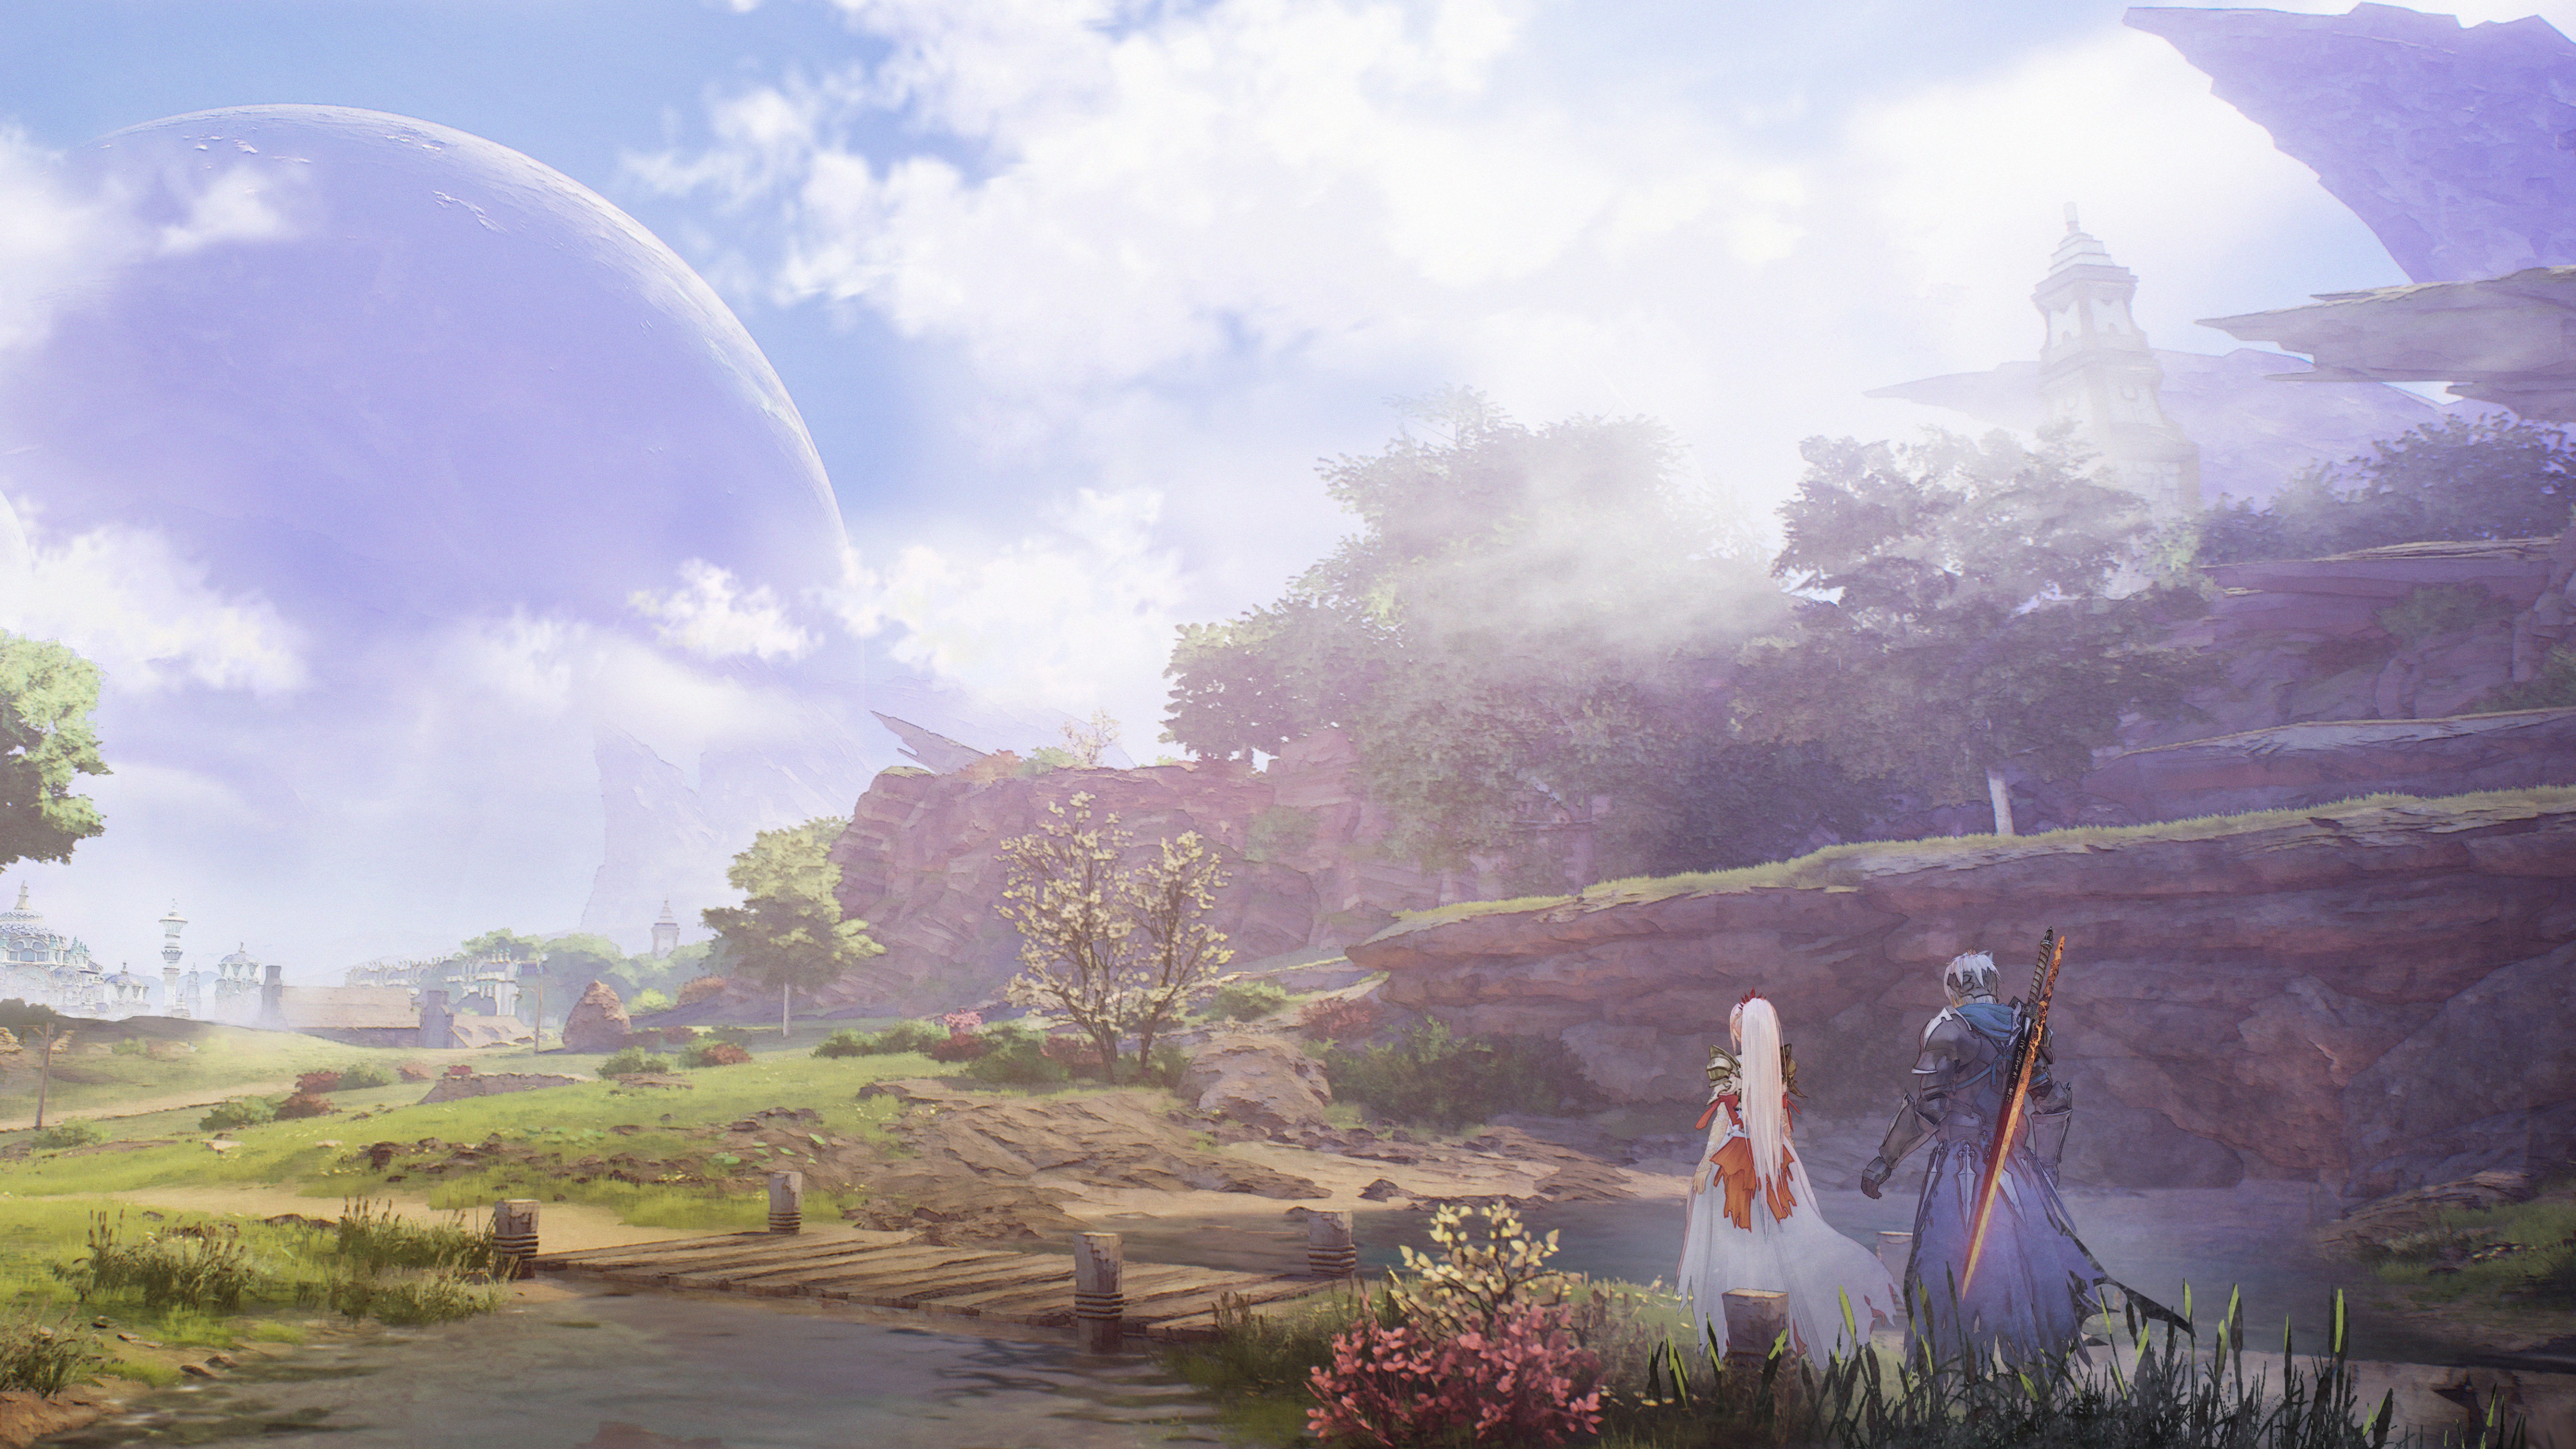 Video Game Tales of Arise HD Wallpaper | Background Image